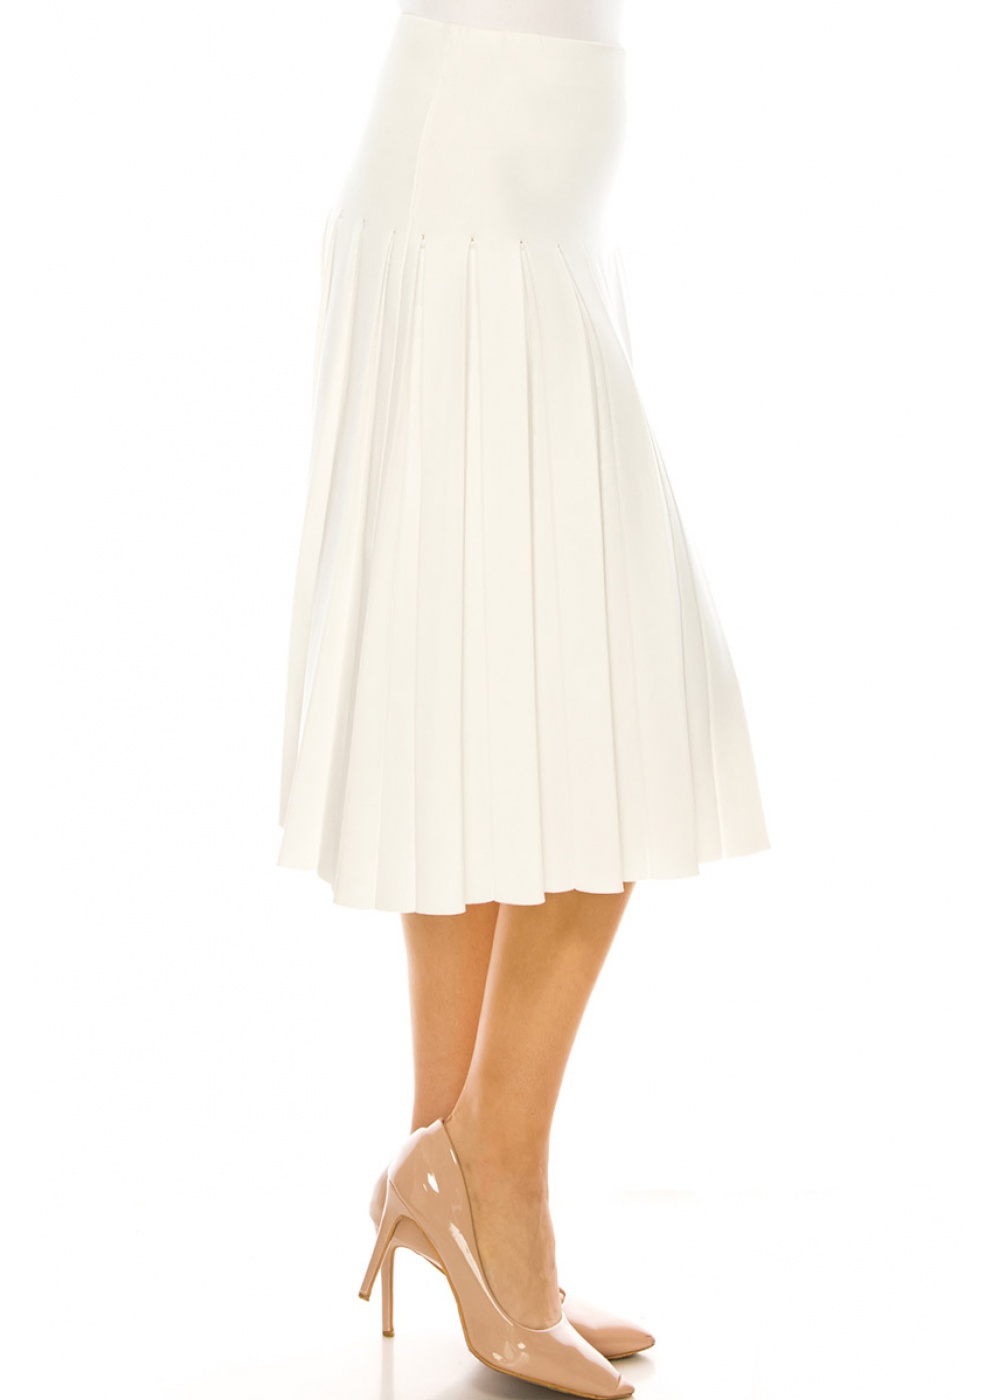 Fixed Box Pleated Skirt in White